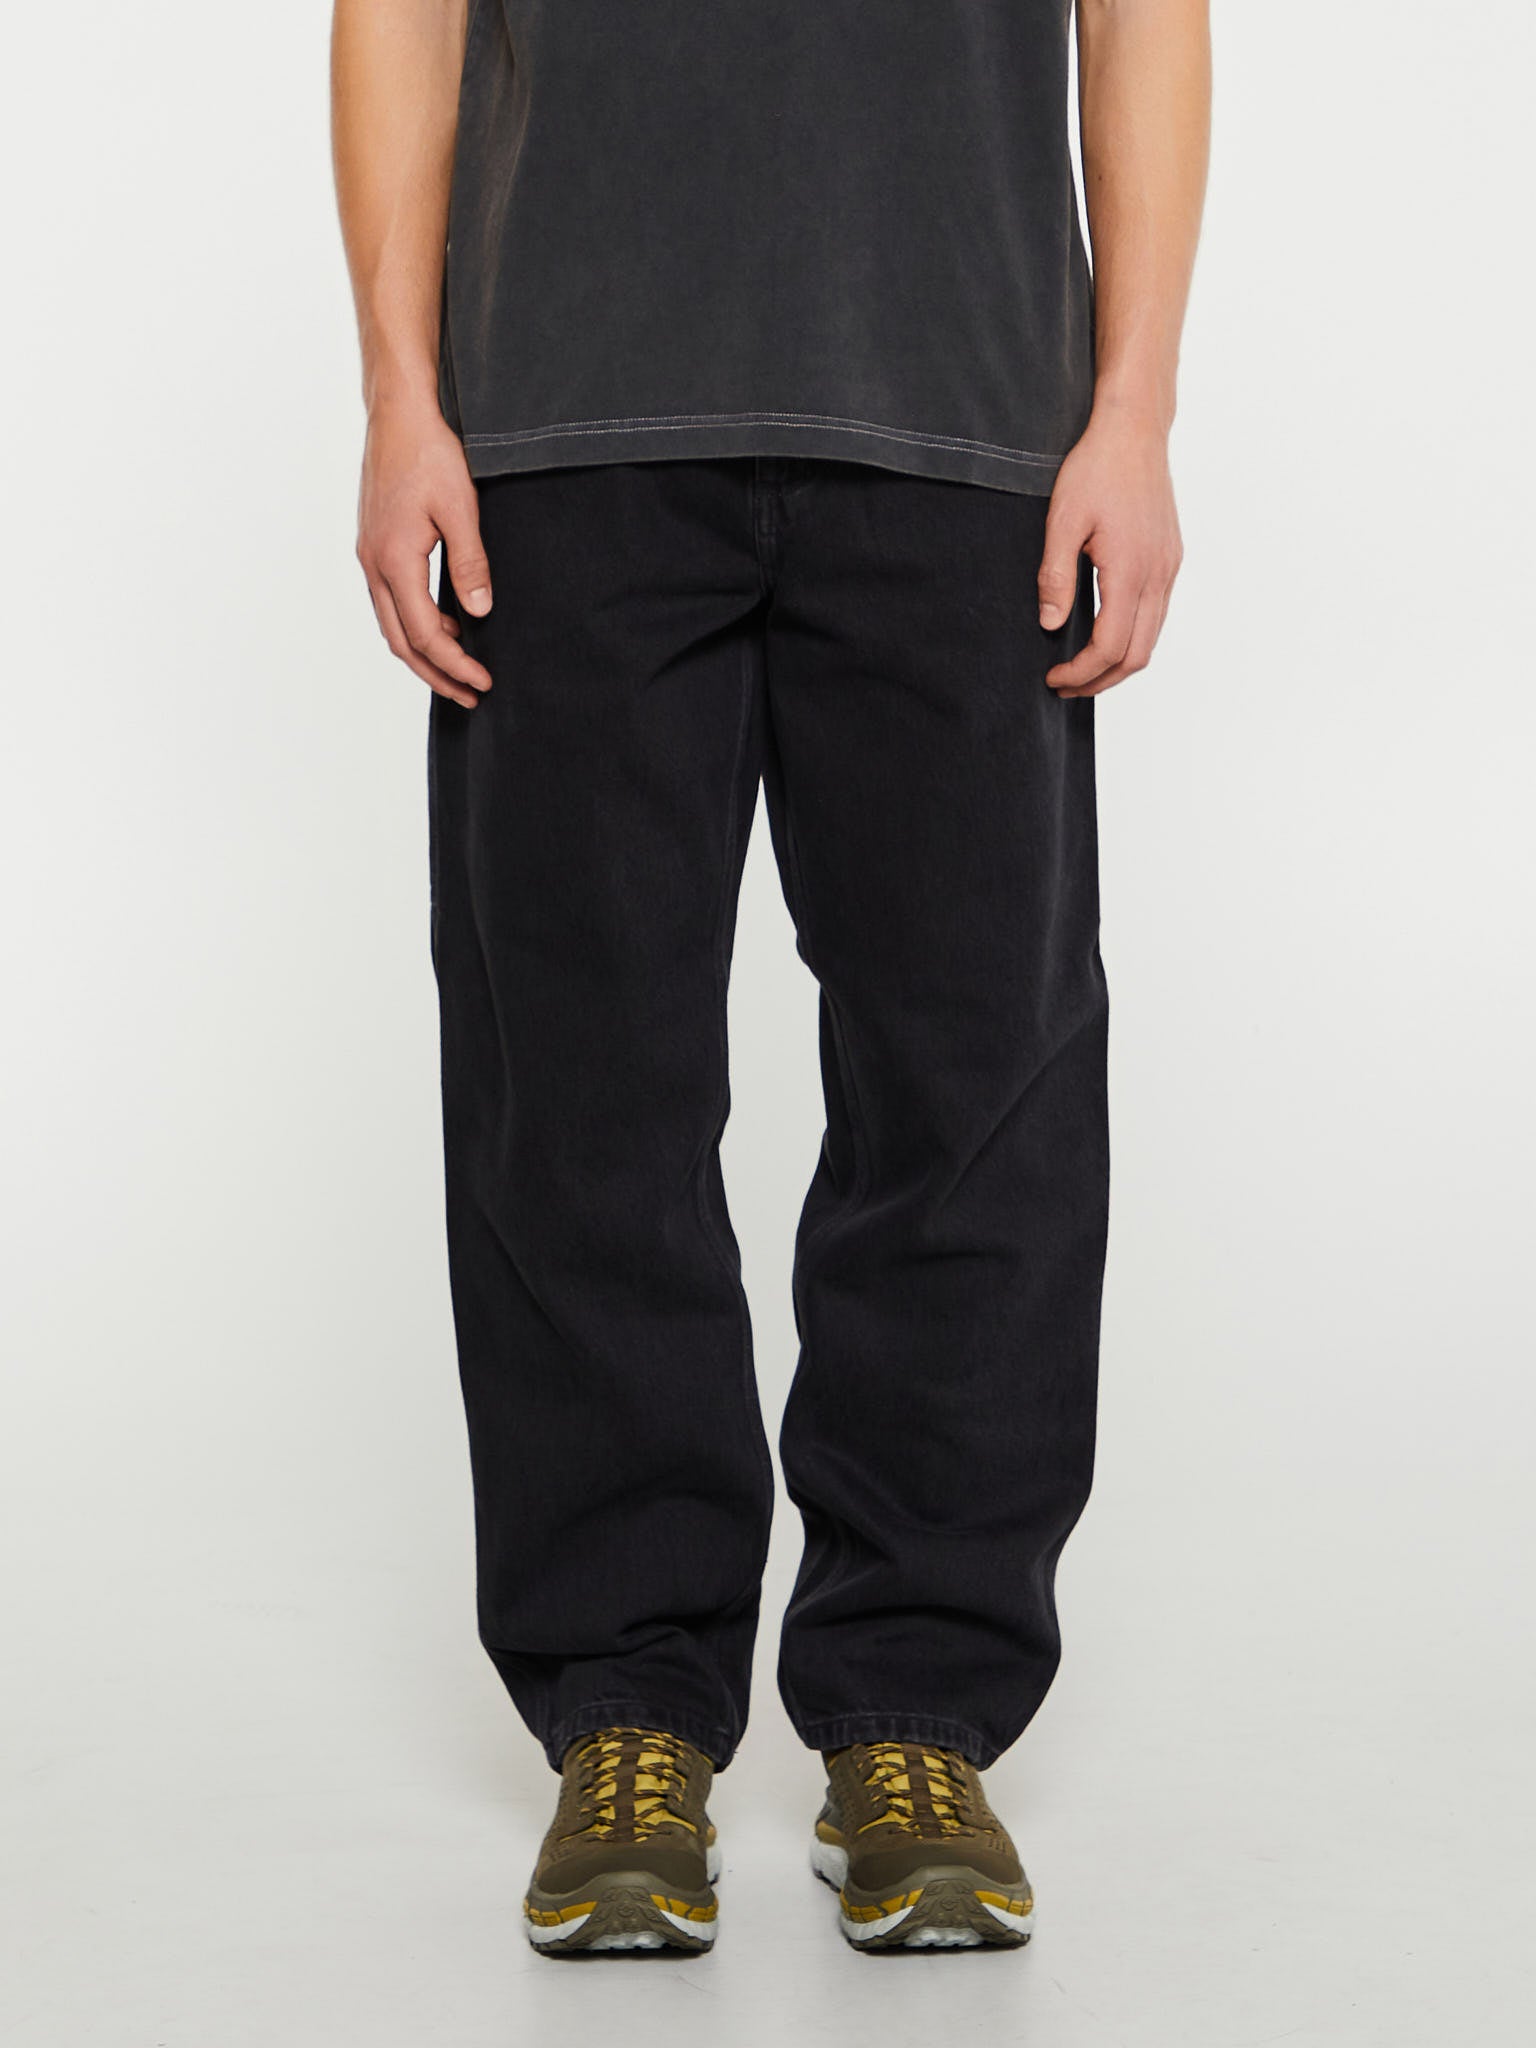 Carhartt - Single Knee Pants in Black Stone Washed